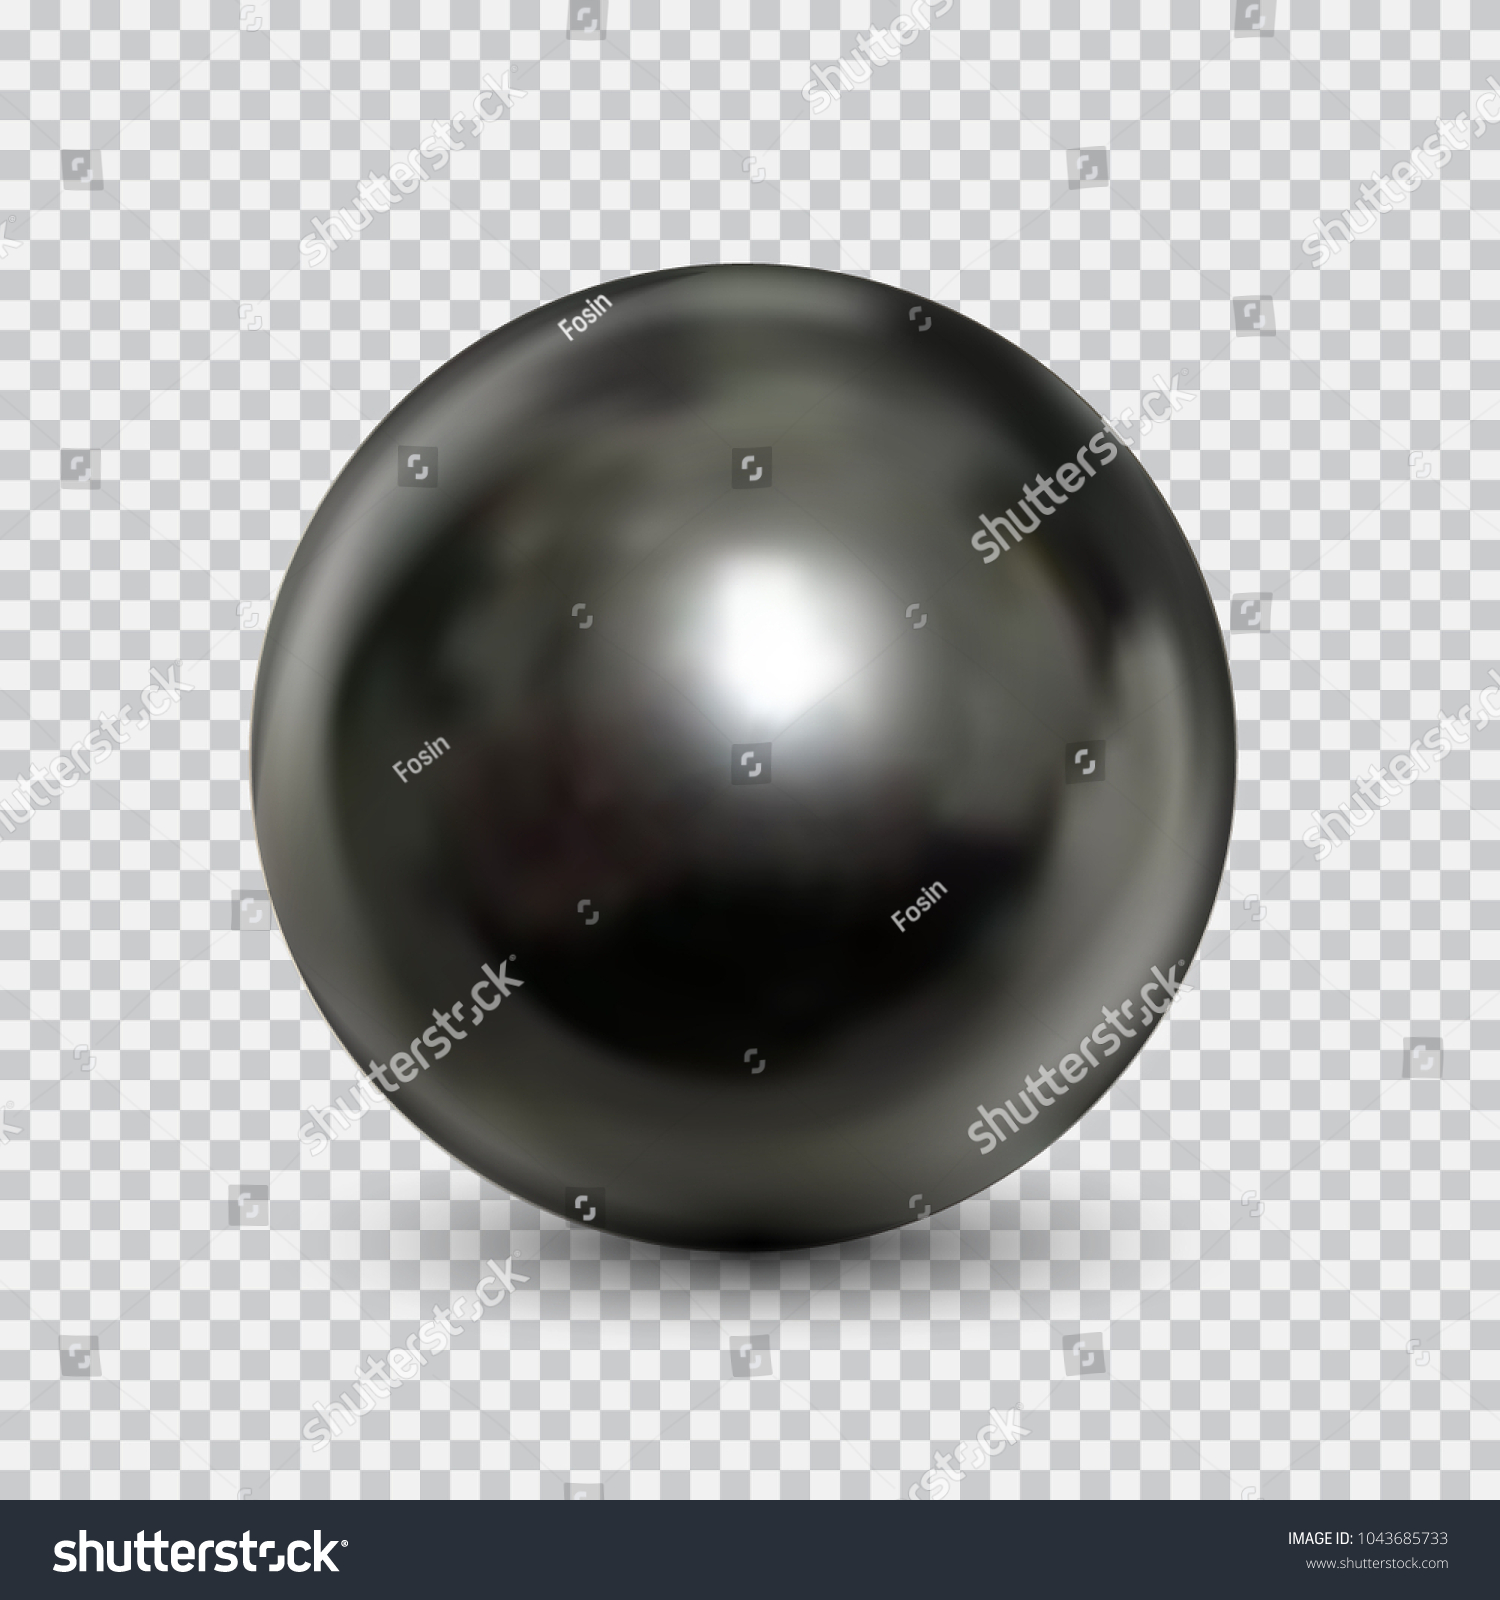 Chrome Metal Ball Realistic Isolated On Stock Vector HD (Royalty ...